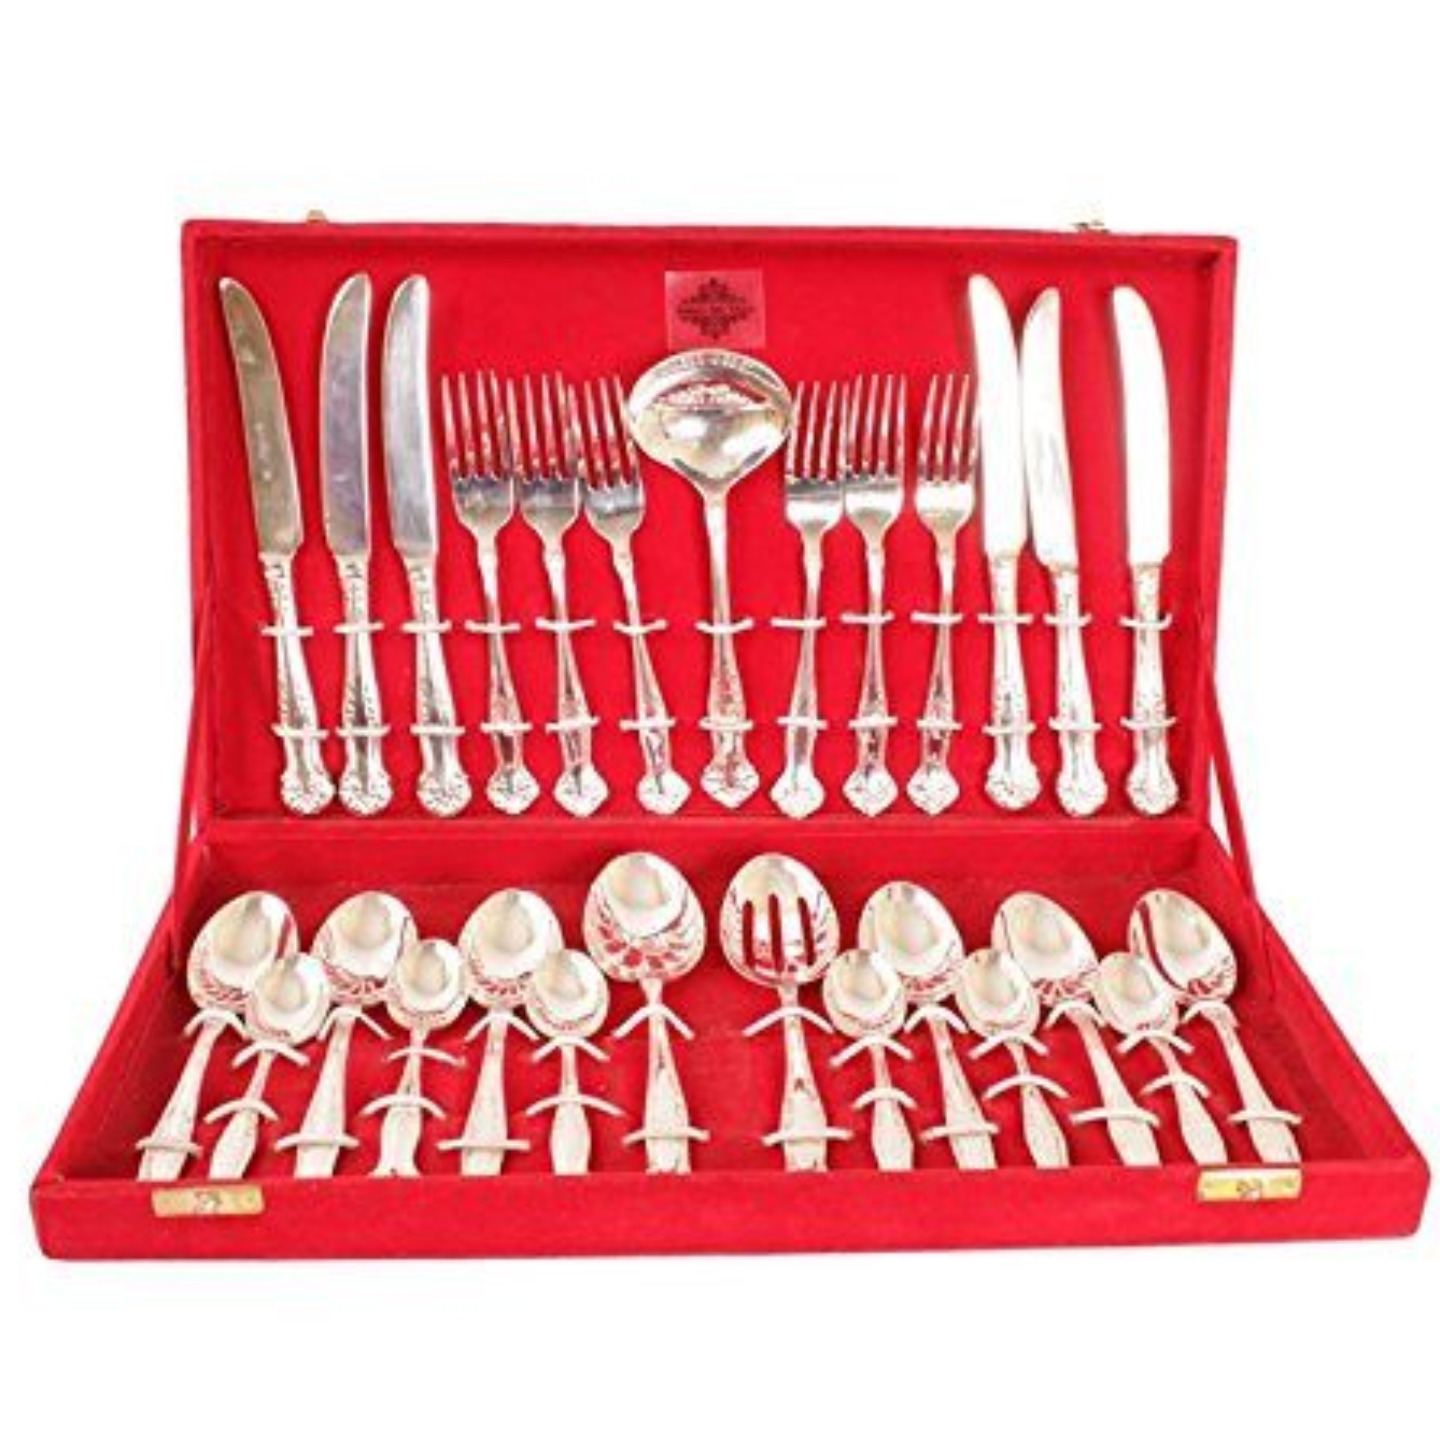 SILVER PLATED 27 PIECE CUTLERY SET - KITCHEN DINING HOME DECORATE GIFT